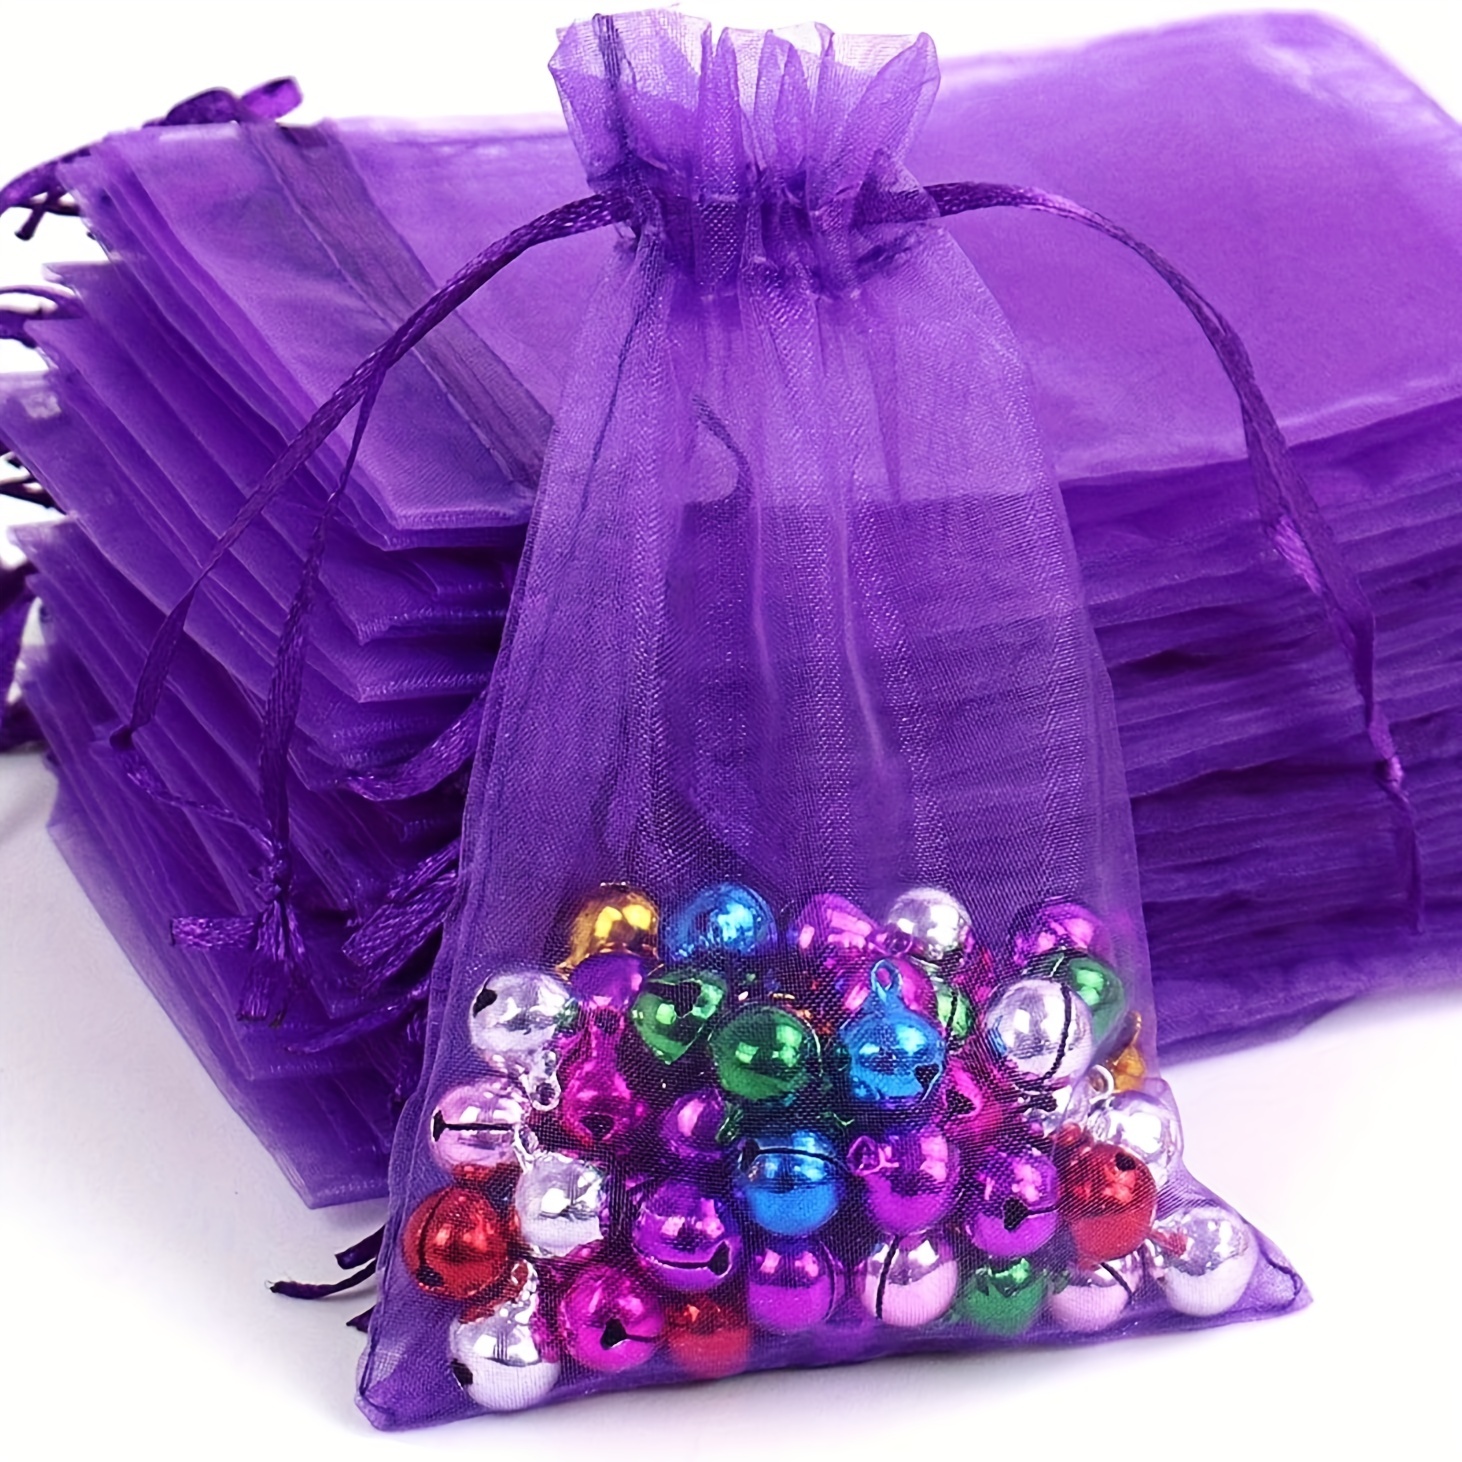 

50pcs Purple Organza Gift Bags - 3.15in X 3.94in - Small Mesh Drawstring Bags For Christmas Gifts And More